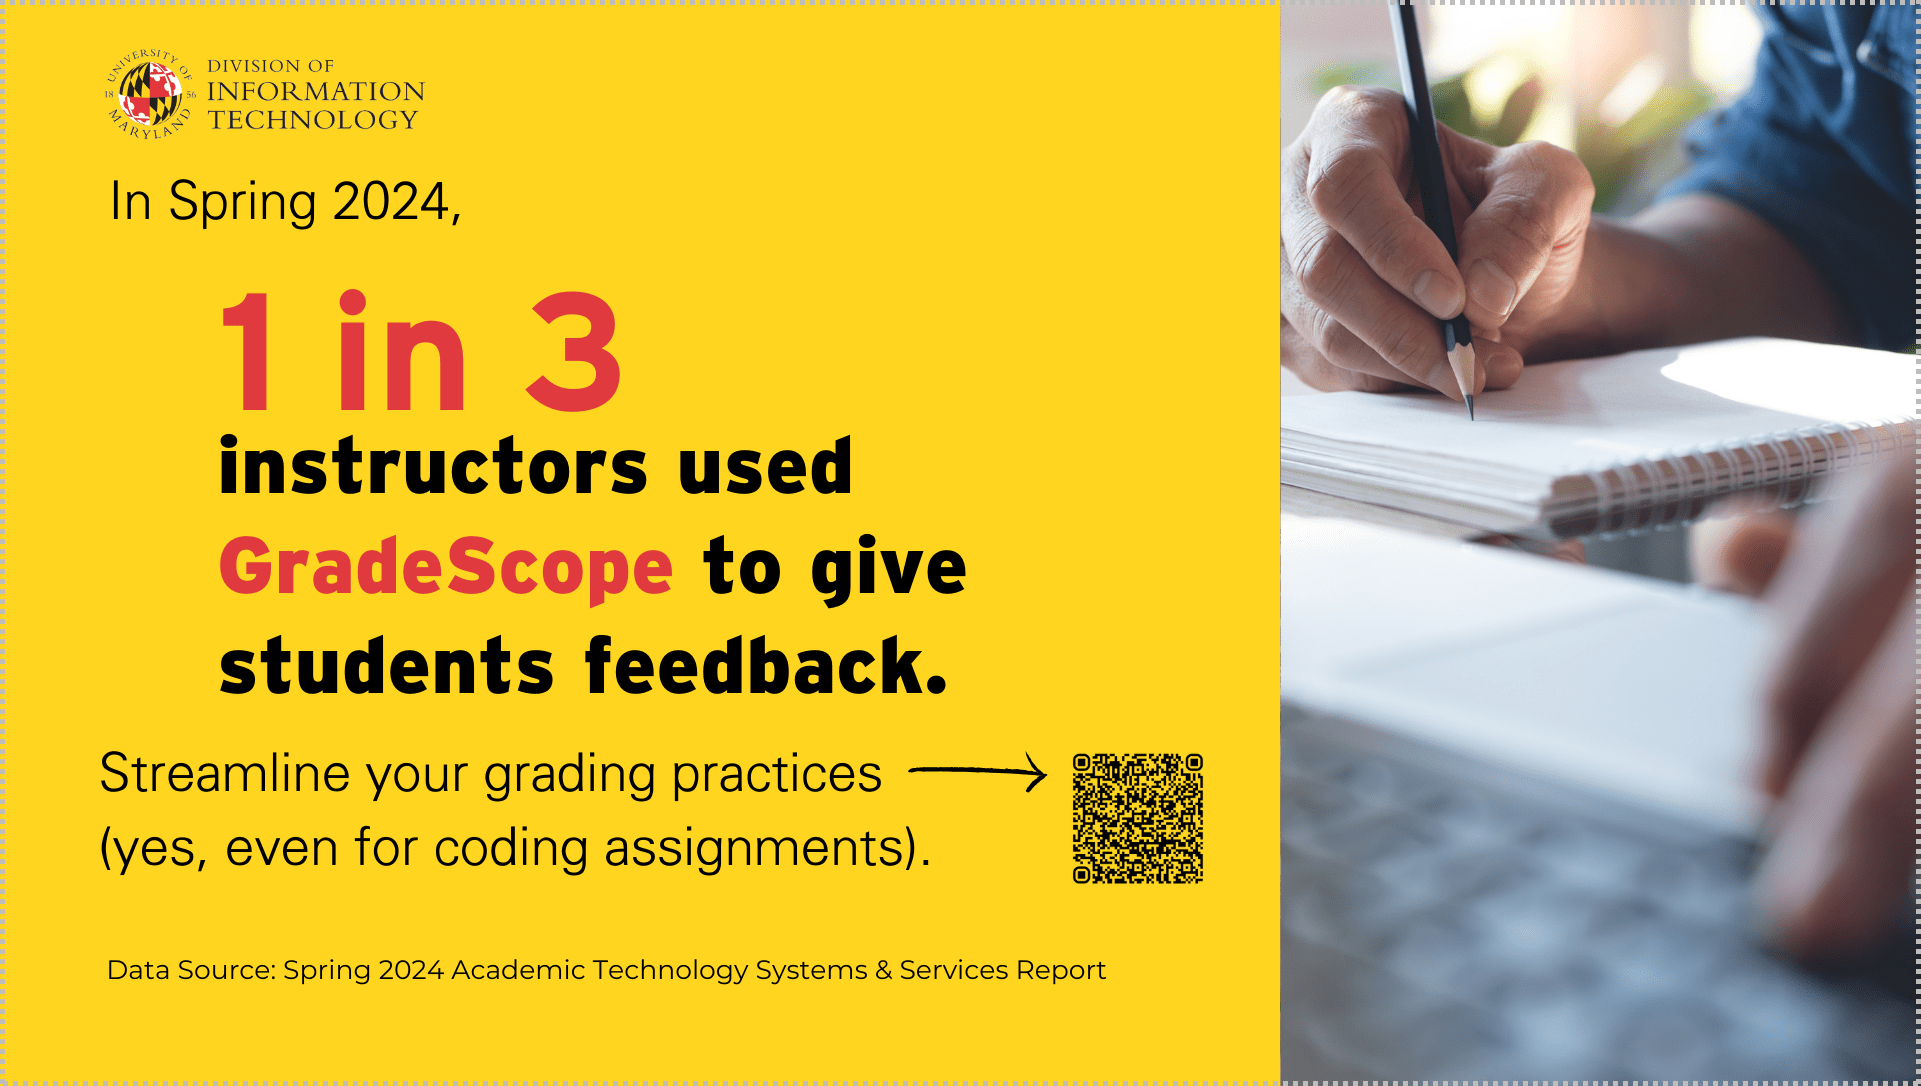 In Spring 2024, 1 in 3 instructors used GradeScope to give students feedback. Streamline your grading practices (yes, even for coding assignments) at https://itsupport.umd.edu/itsupport?id=kb_article_view&table=kb_knowledge&sys_kb_id=48915e6d1b95fd14642d5287624bcb4b